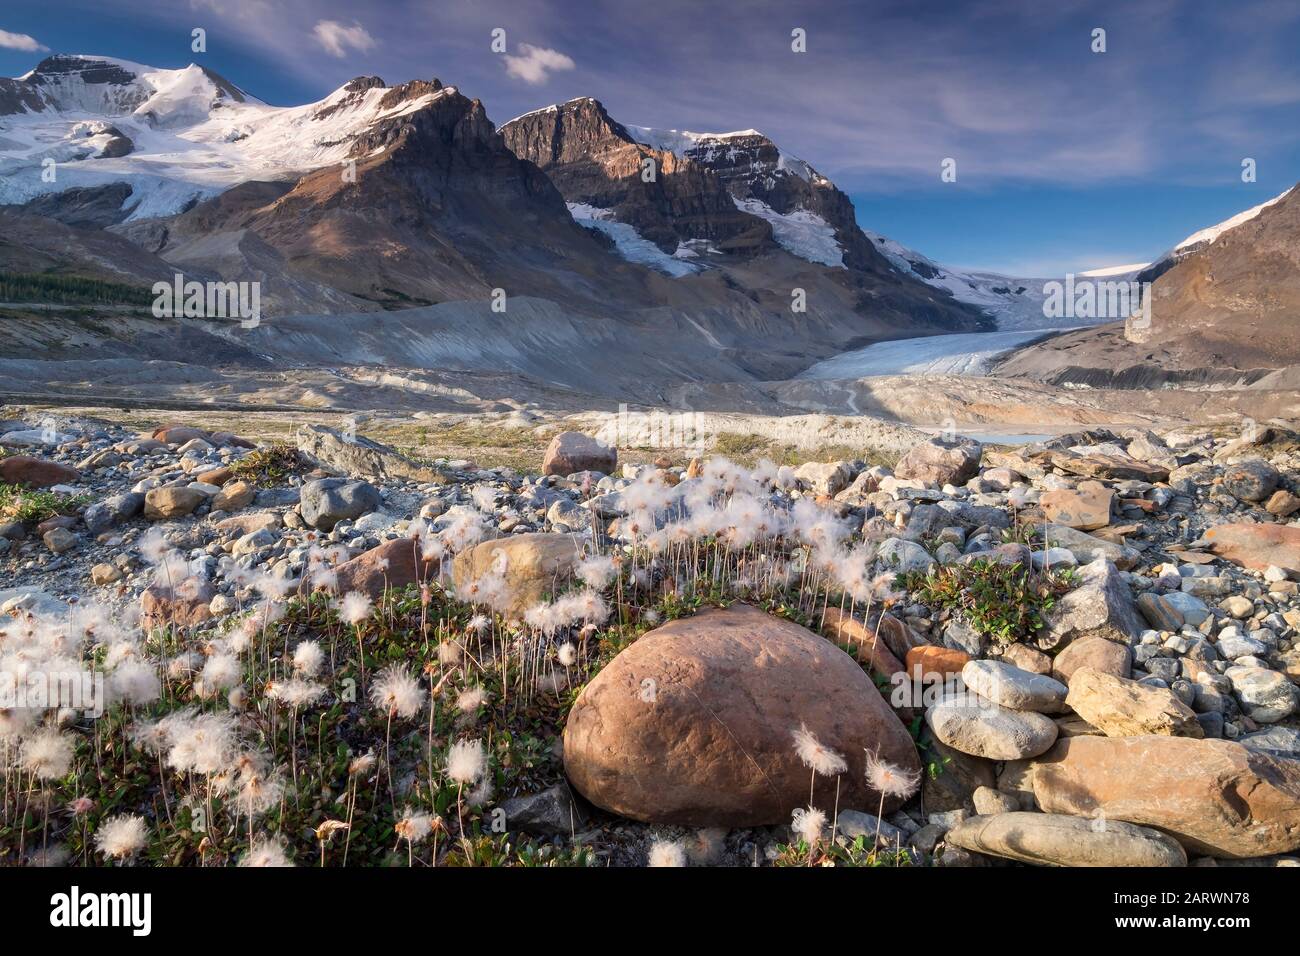 Cotton Grass & Moraines below the Athabasca Glacier, backed by Mount Athabasca & Mount Andromeda, Jasper National Park, Canadian Rockies, Canada Stock Photo